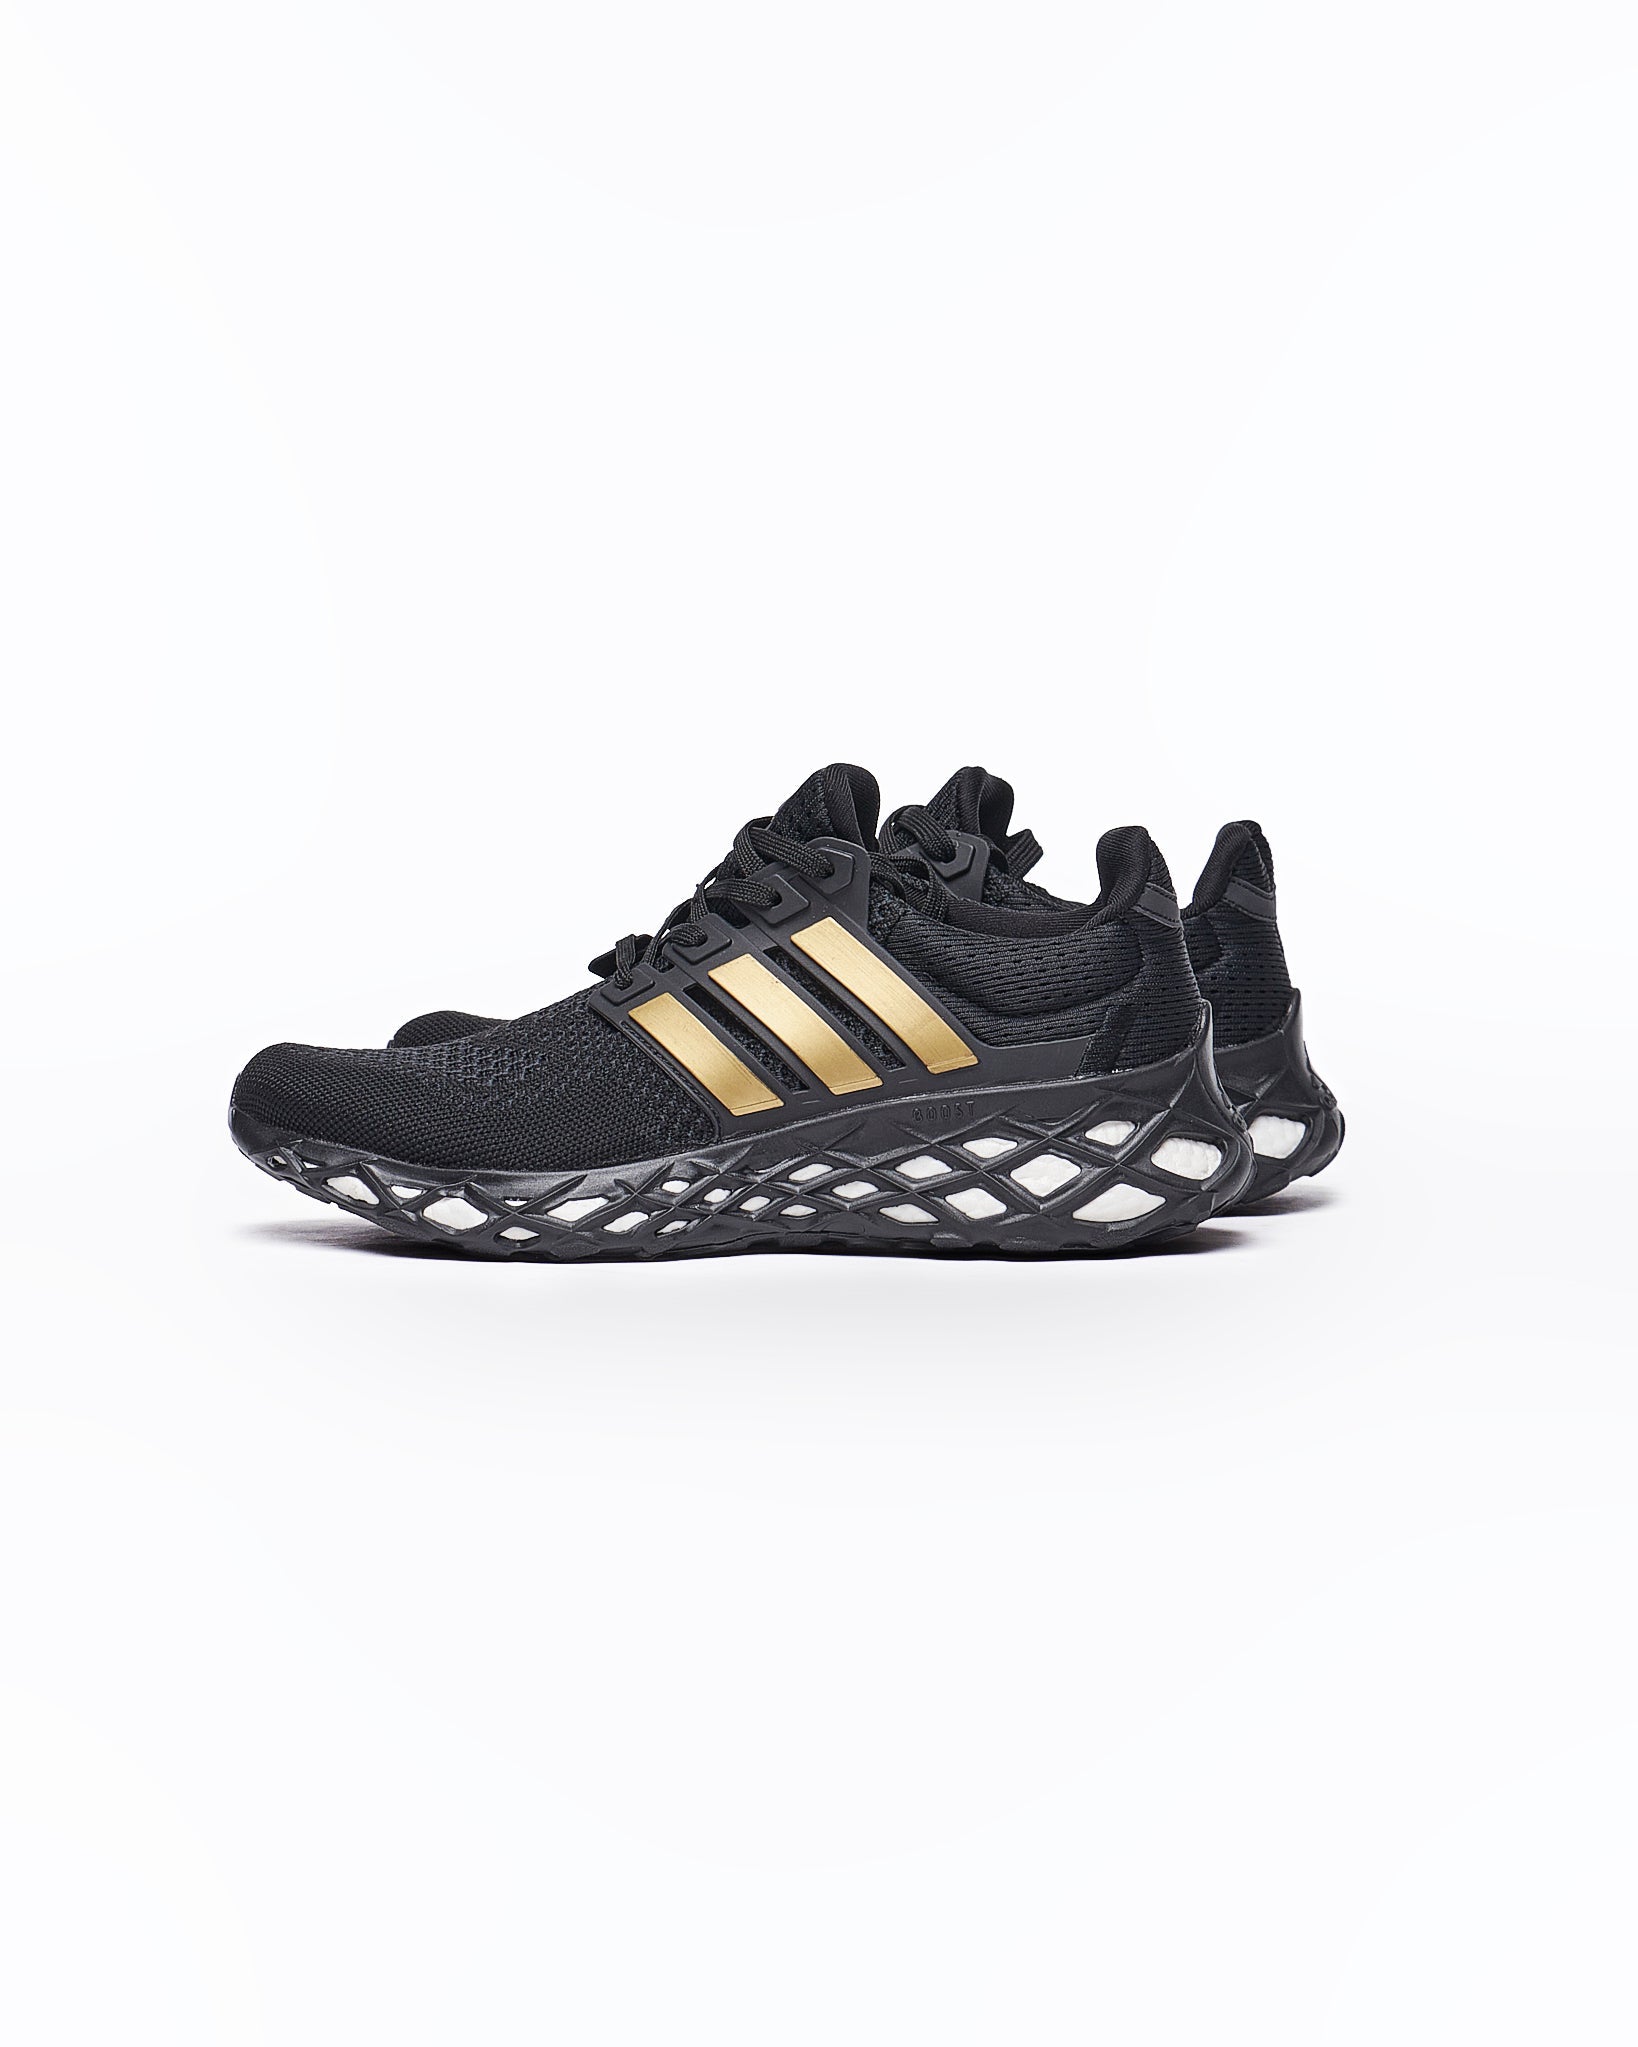 MOI OUTFIT-ADI Ultra Boost Men Golden Black Runners Shoes 44.90